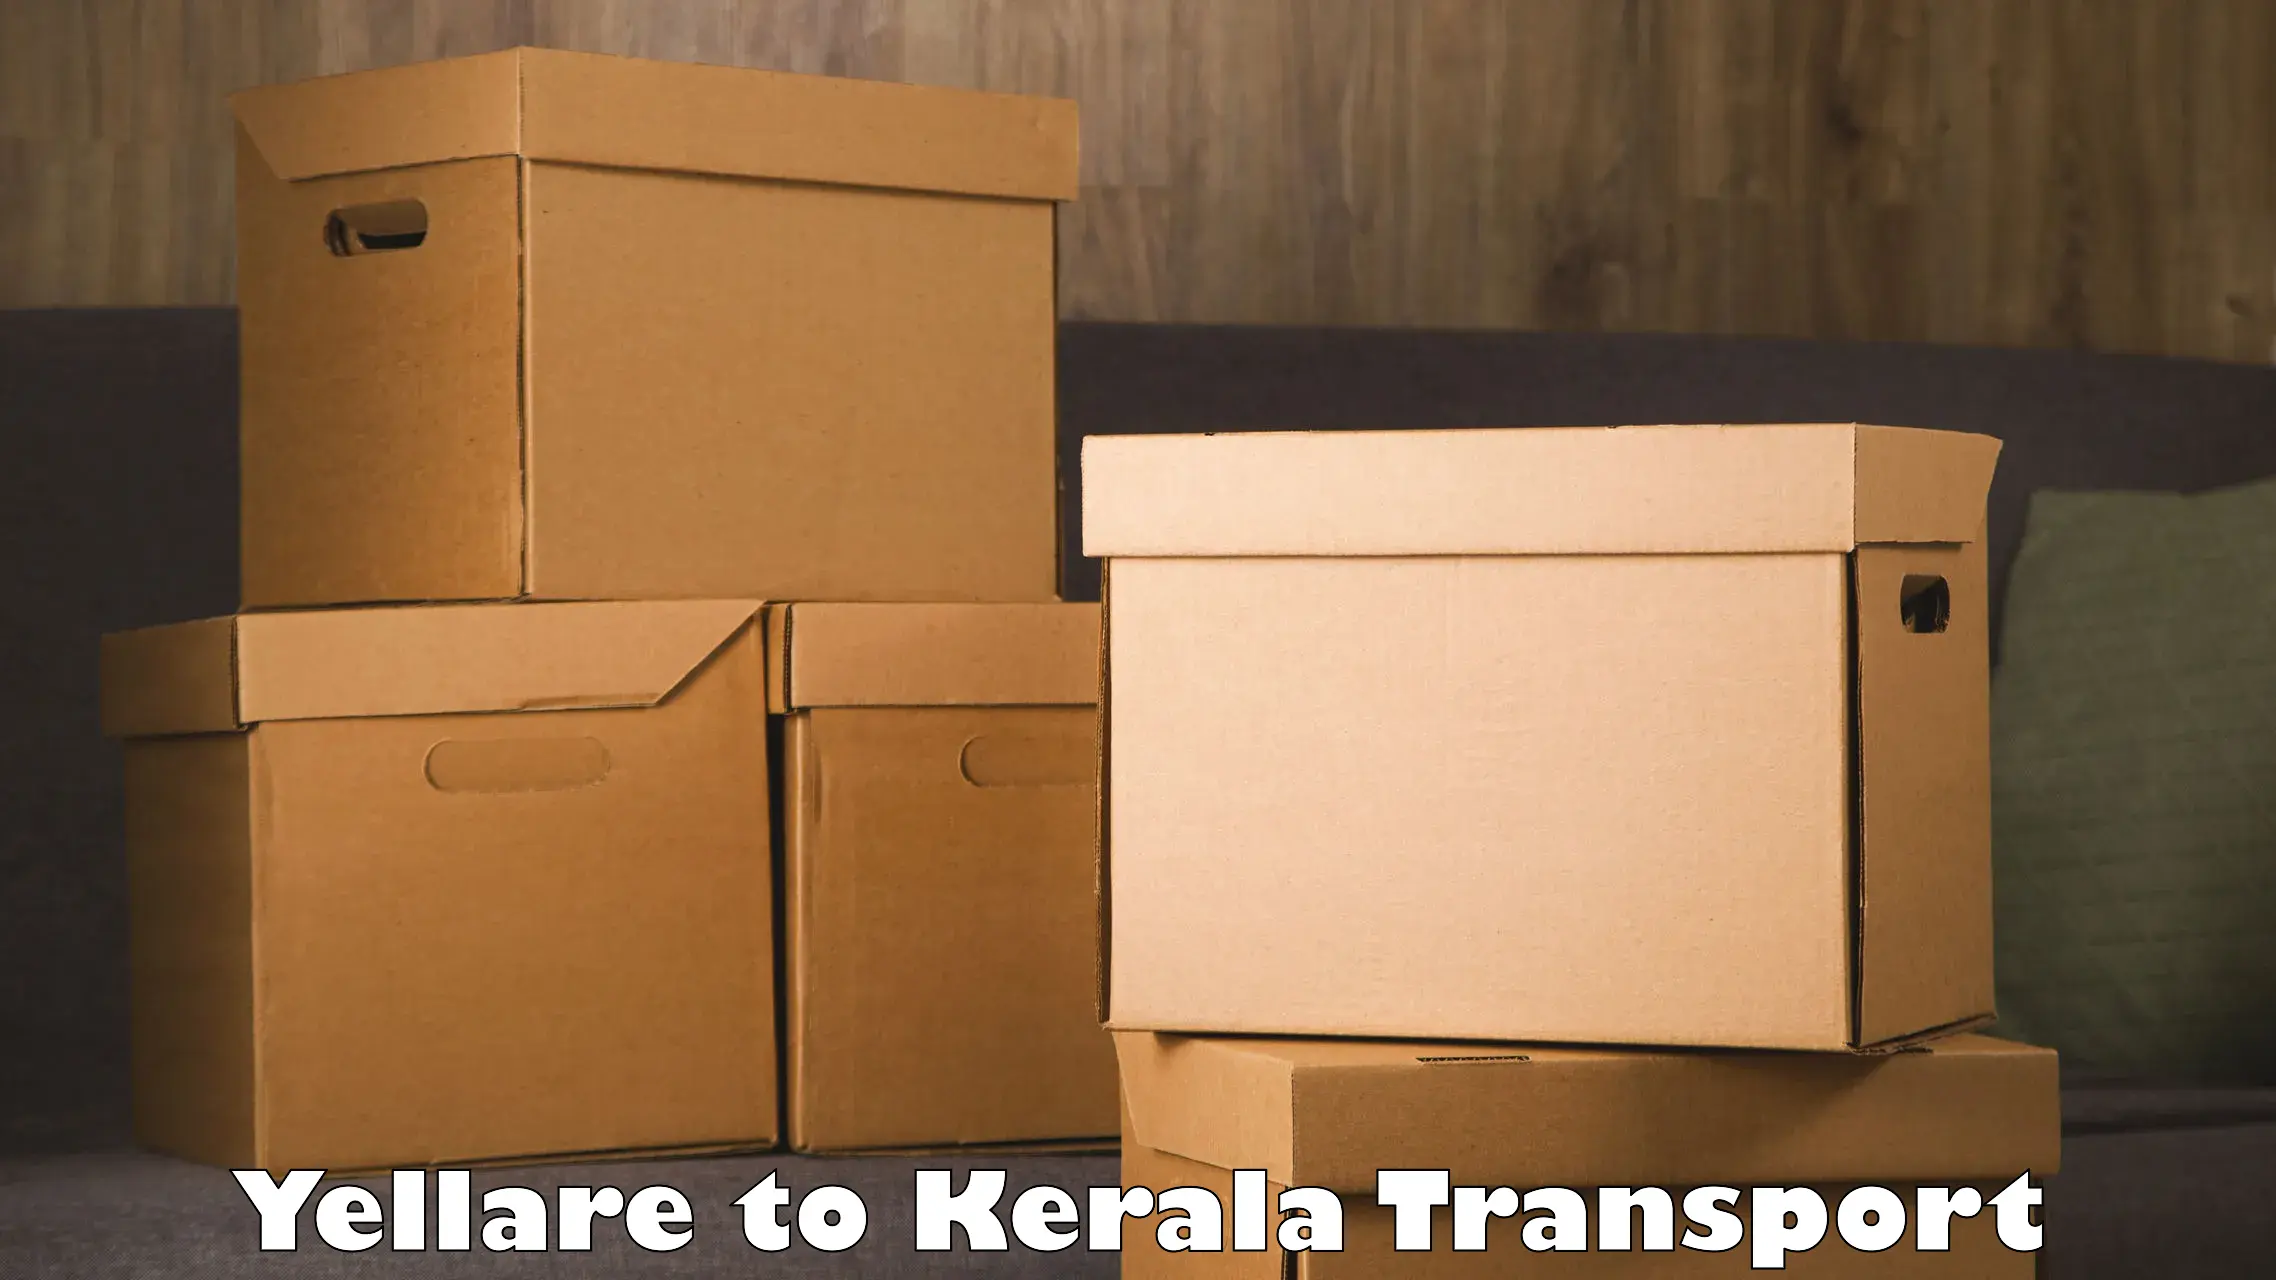 Transport shared services Yellare to Kerala